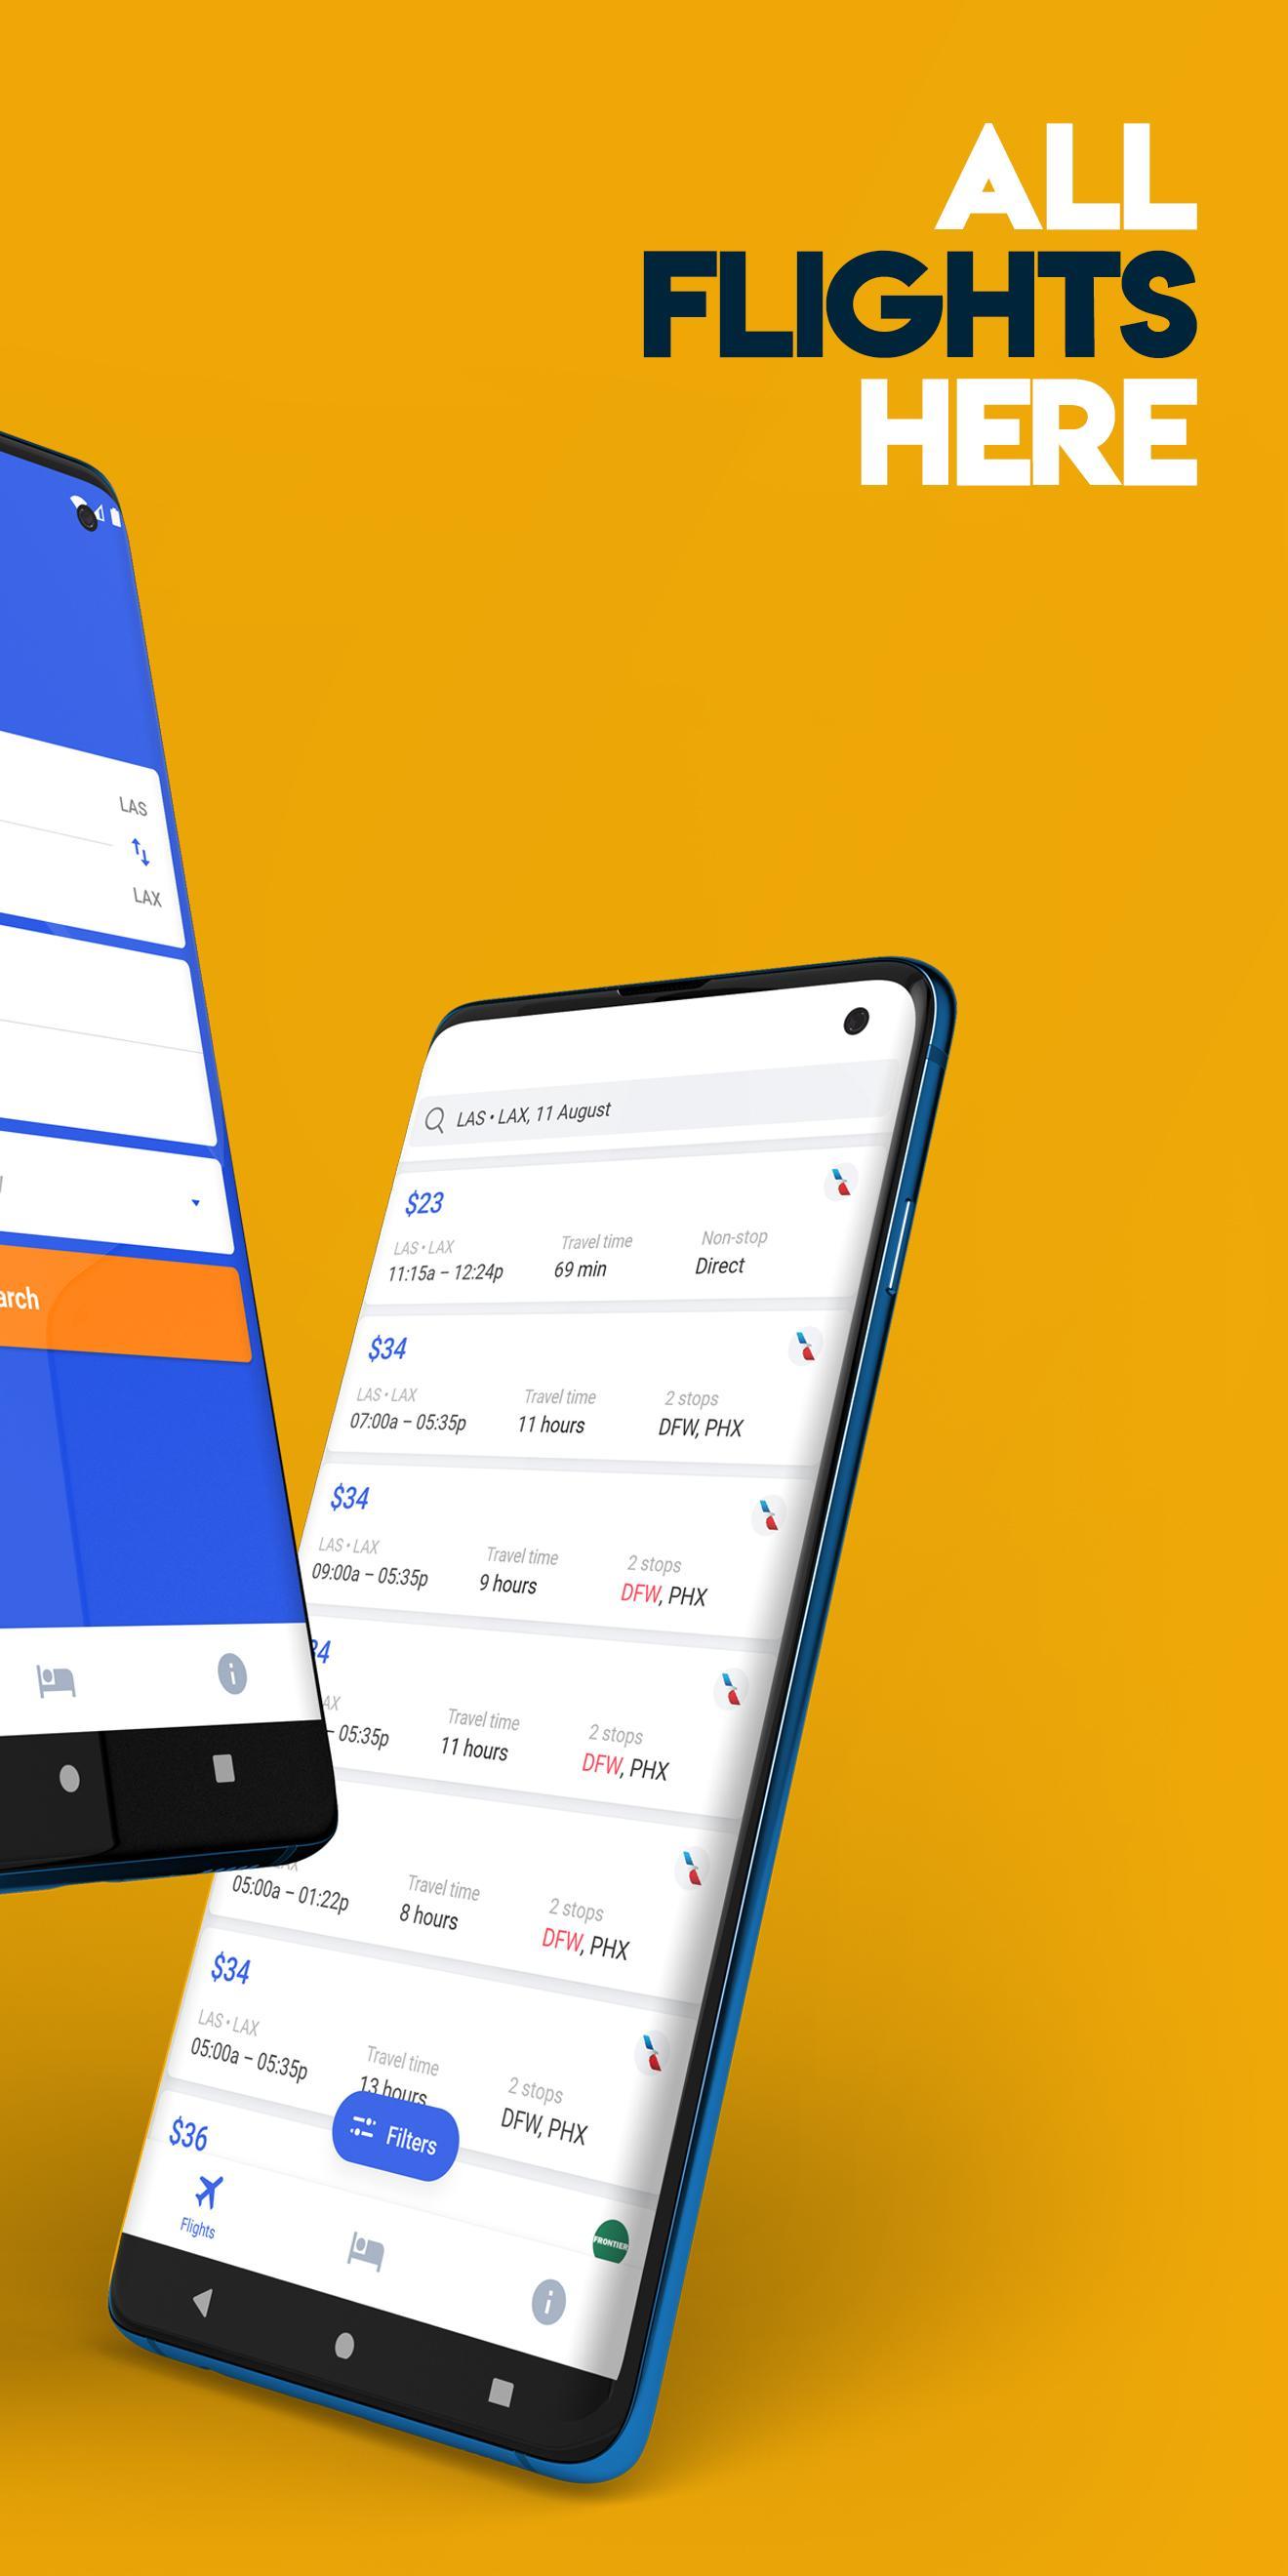 Last Minute Deals Flights And Hotel Booking App For Android Apk Download